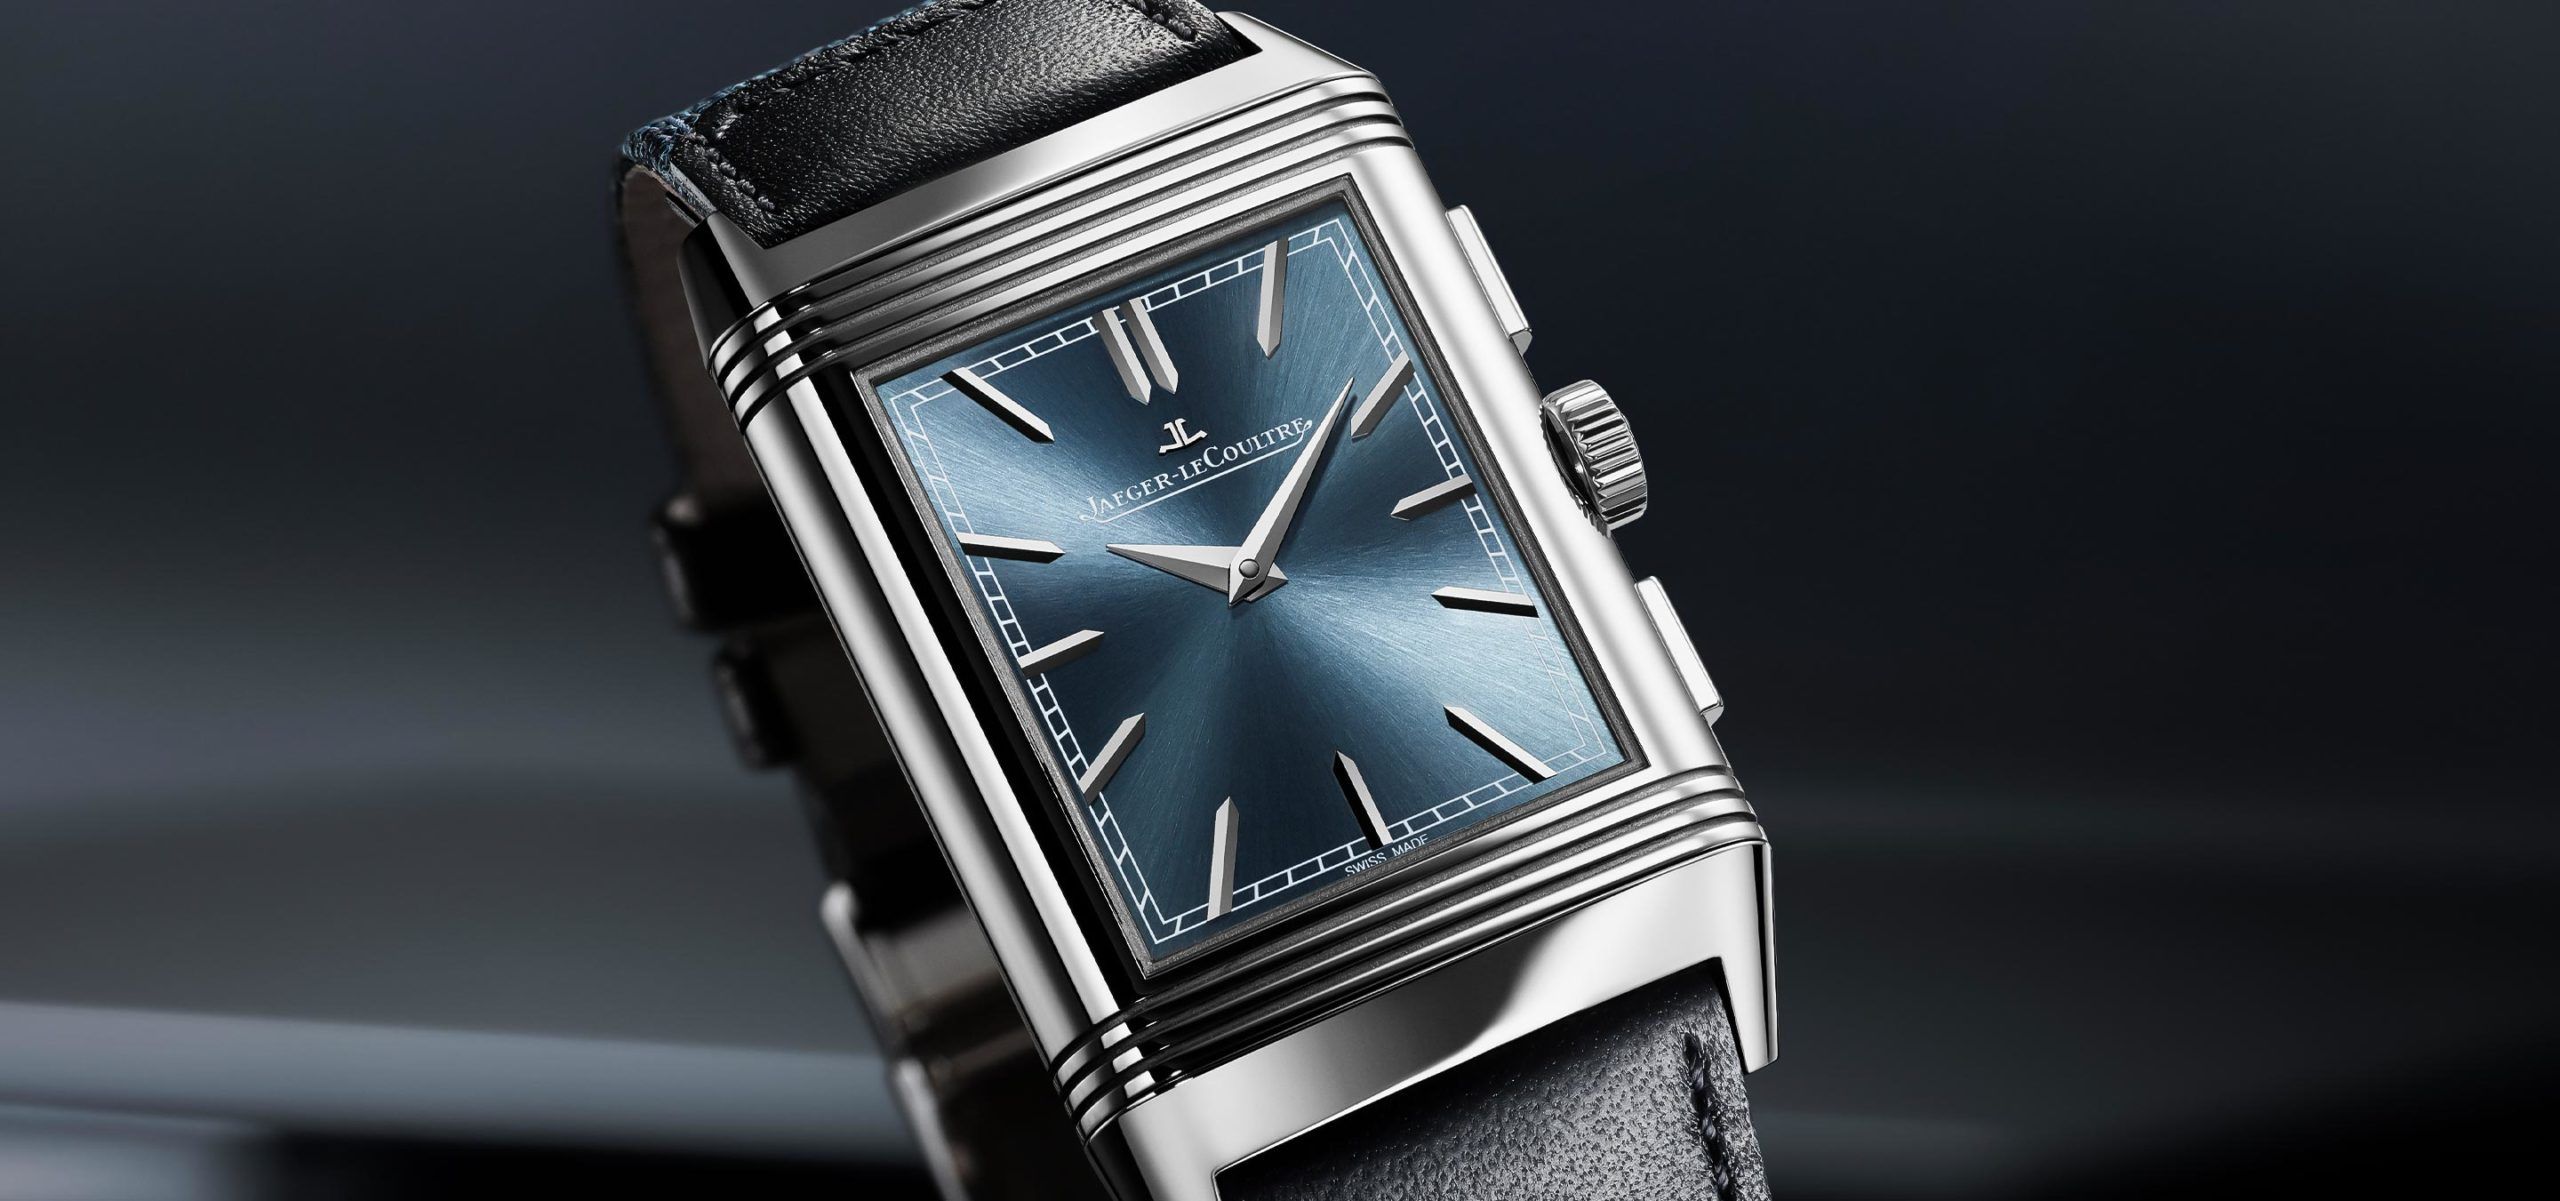 The Reverso Tribute Chronograph Takes A Page From Jaeger-LeCoultre's Rich History